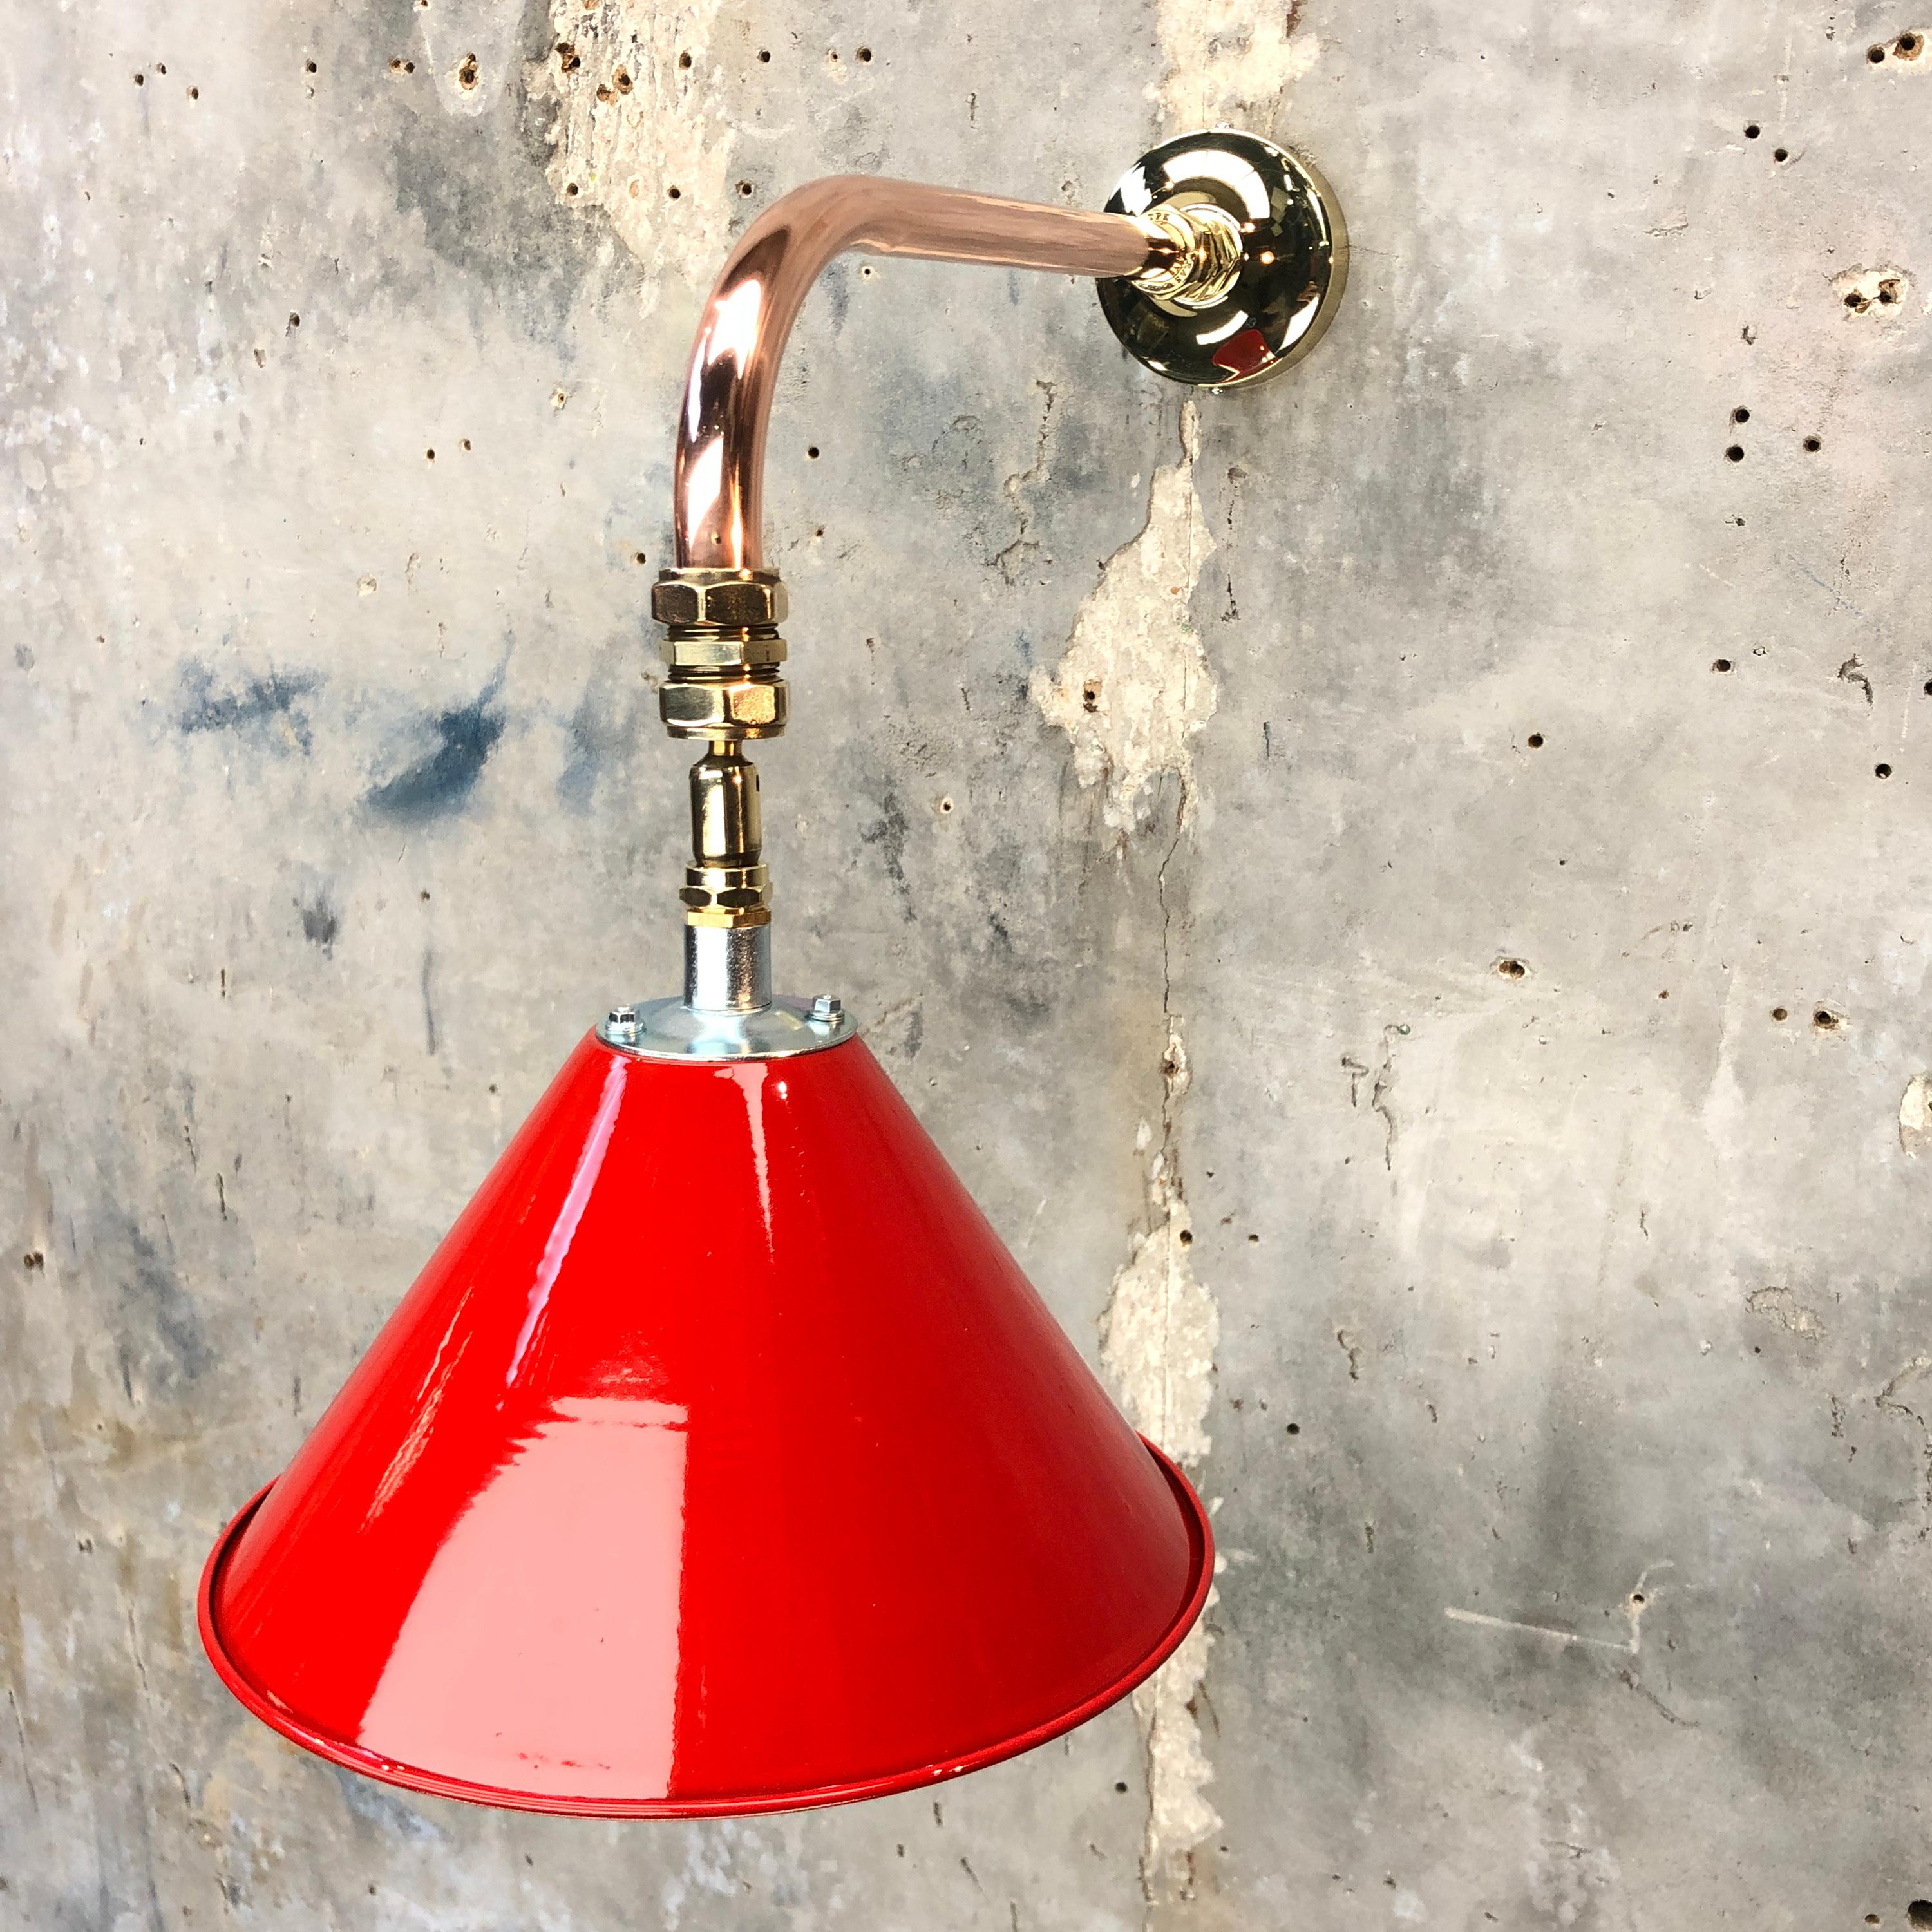 Spun 1980 British Army Lamp Shade in Red with Copper Cantilever Wall Lamp Edison Bulb For Sale